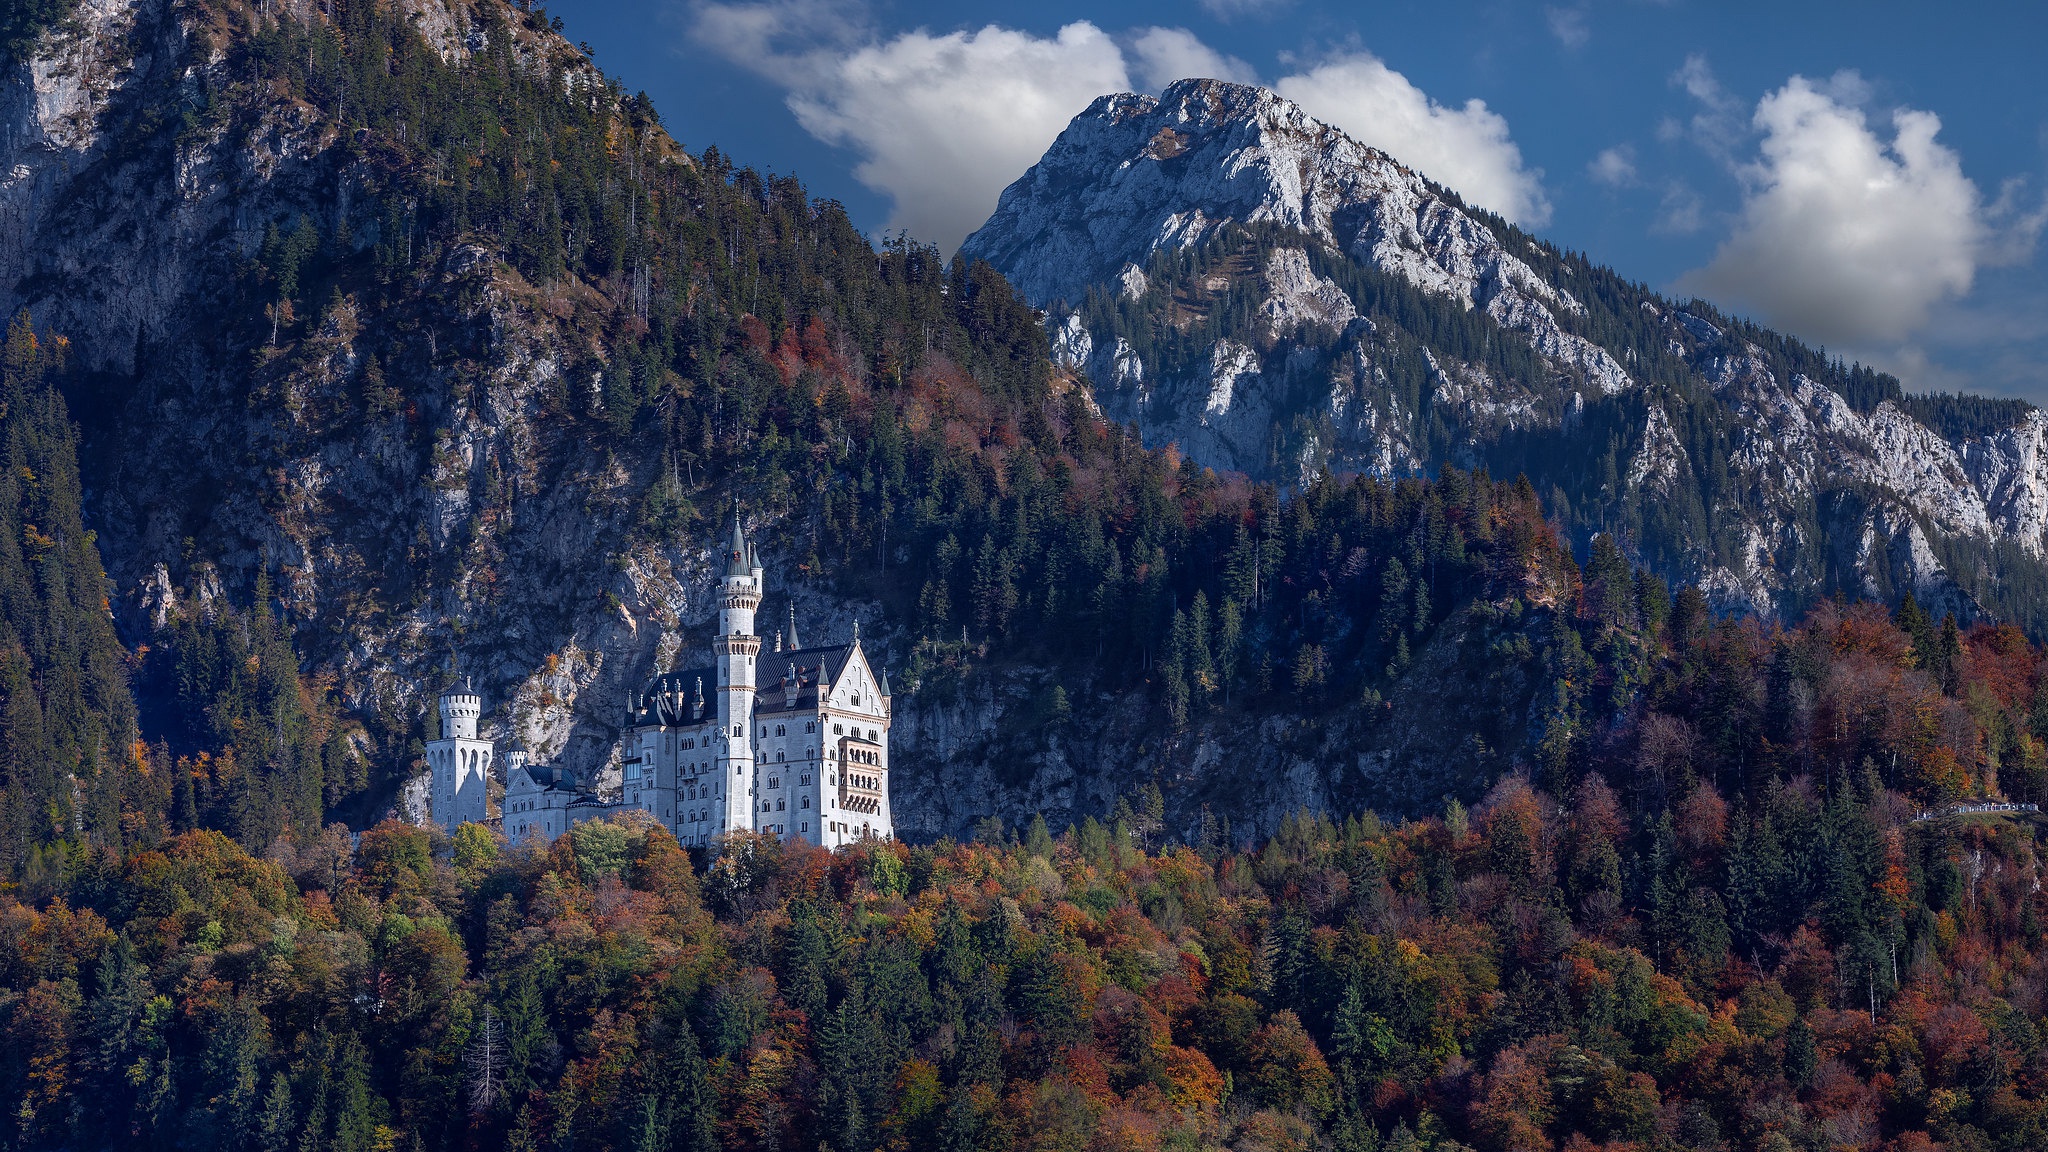 Download mobile wallpaper Castles, Mountain, Forest, Fall, Germany, Bavaria, Neuschwanstein Castle, Man Made, Castle for free.